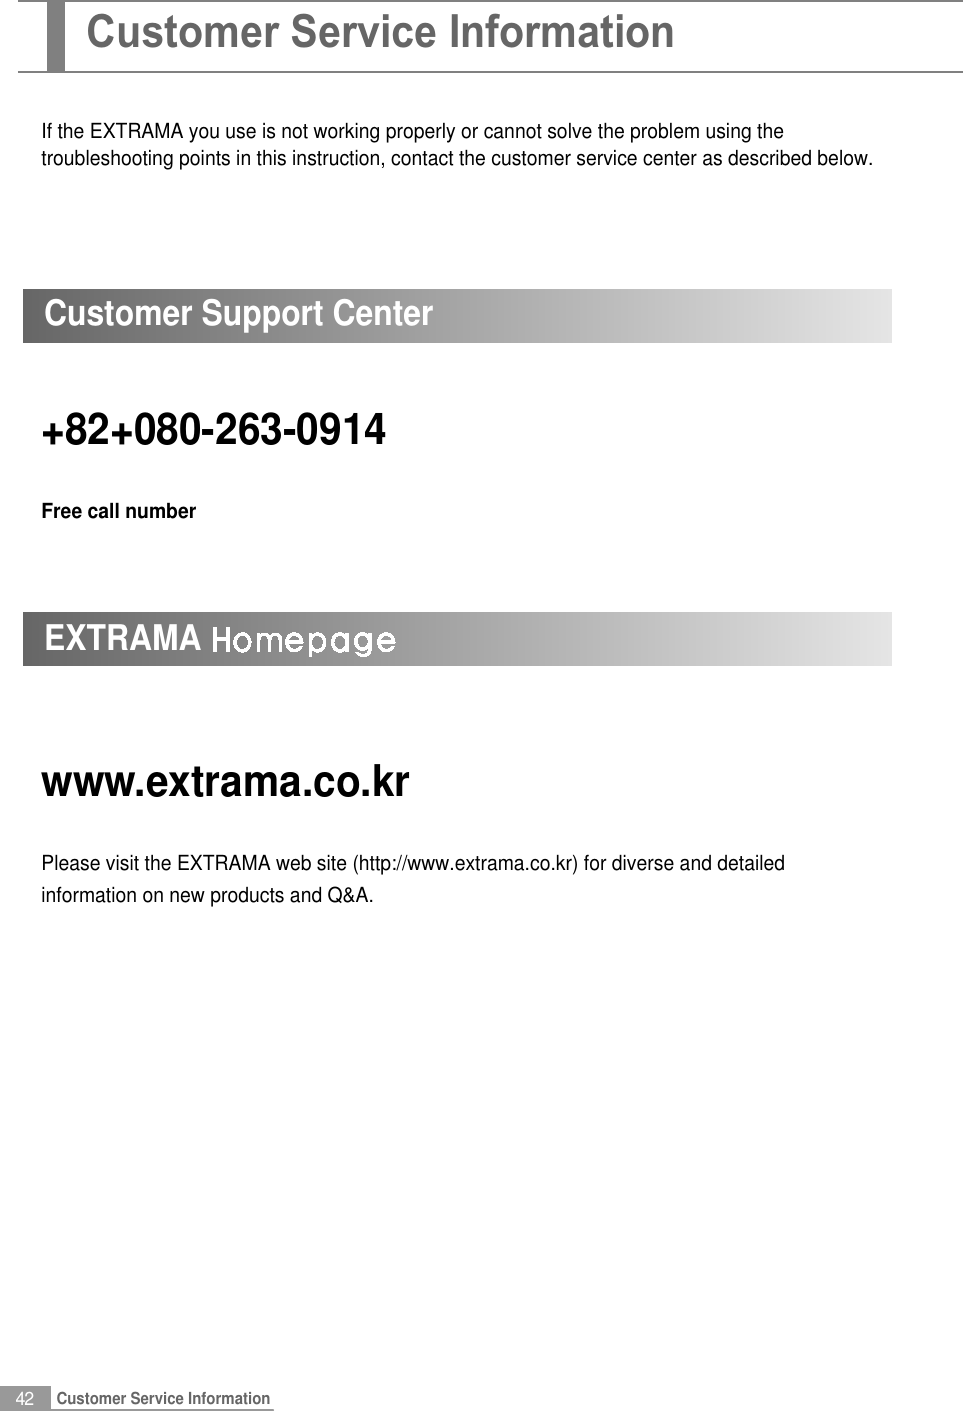 42Customer Service InformationIf the EXTRAMA you use is not working properly or cannot solve the problem using thetroubleshooting points in this instruction, contact the customer service center as described below.www.extrama.co.krPlease visit the EXTRAMA web site (http://www.extrama.co.kr) for diverse and detailedinformation on new products and Q&amp;A.+82+080-263-0914Free call numberCustomer Support CenterEXTRAMACustomer Service Information